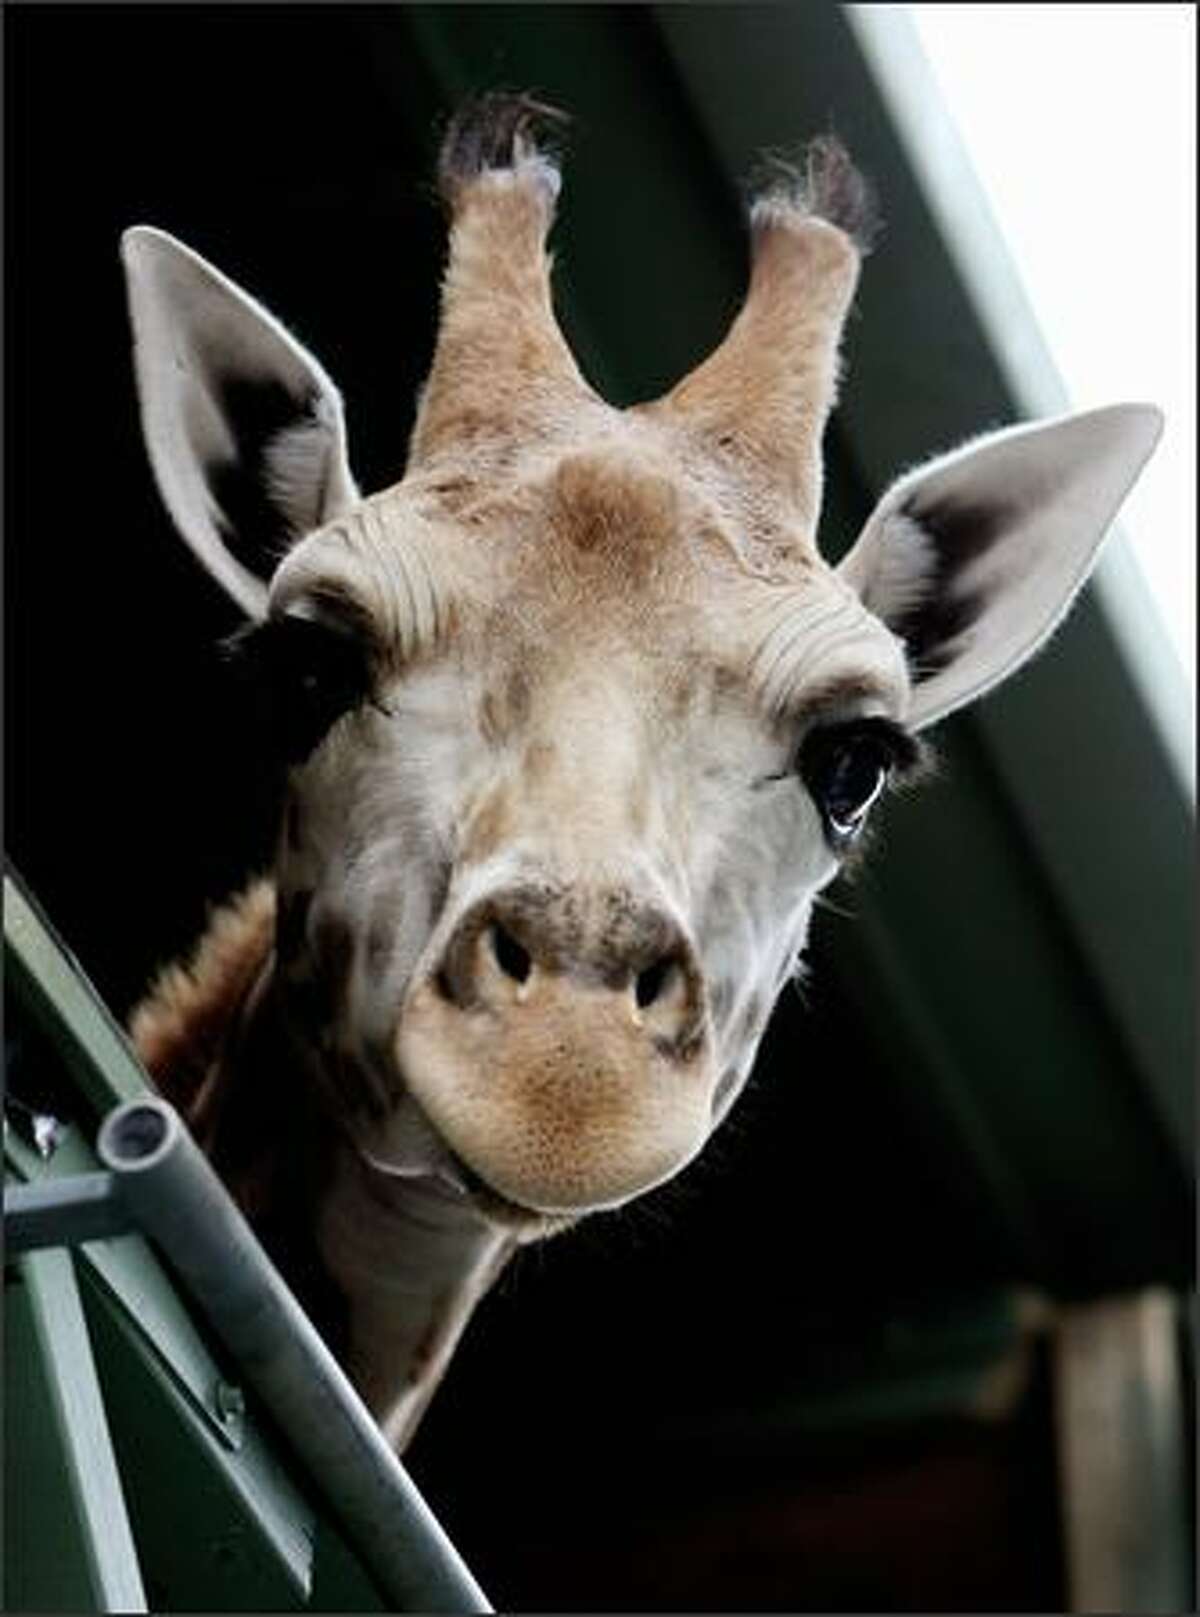 'Forrest' a one year old male Giraffe, looks out from his travelling crate as he is driven away after being unloaded from a ship at Port Botany near Sydney. 'Forrest' and his 16 month old sister 'Ntombi' were shipped from New Zealand's Auckland Zoo to be taken to Taronga Western Plains Zoo before entering their respective breeding programs. AFP